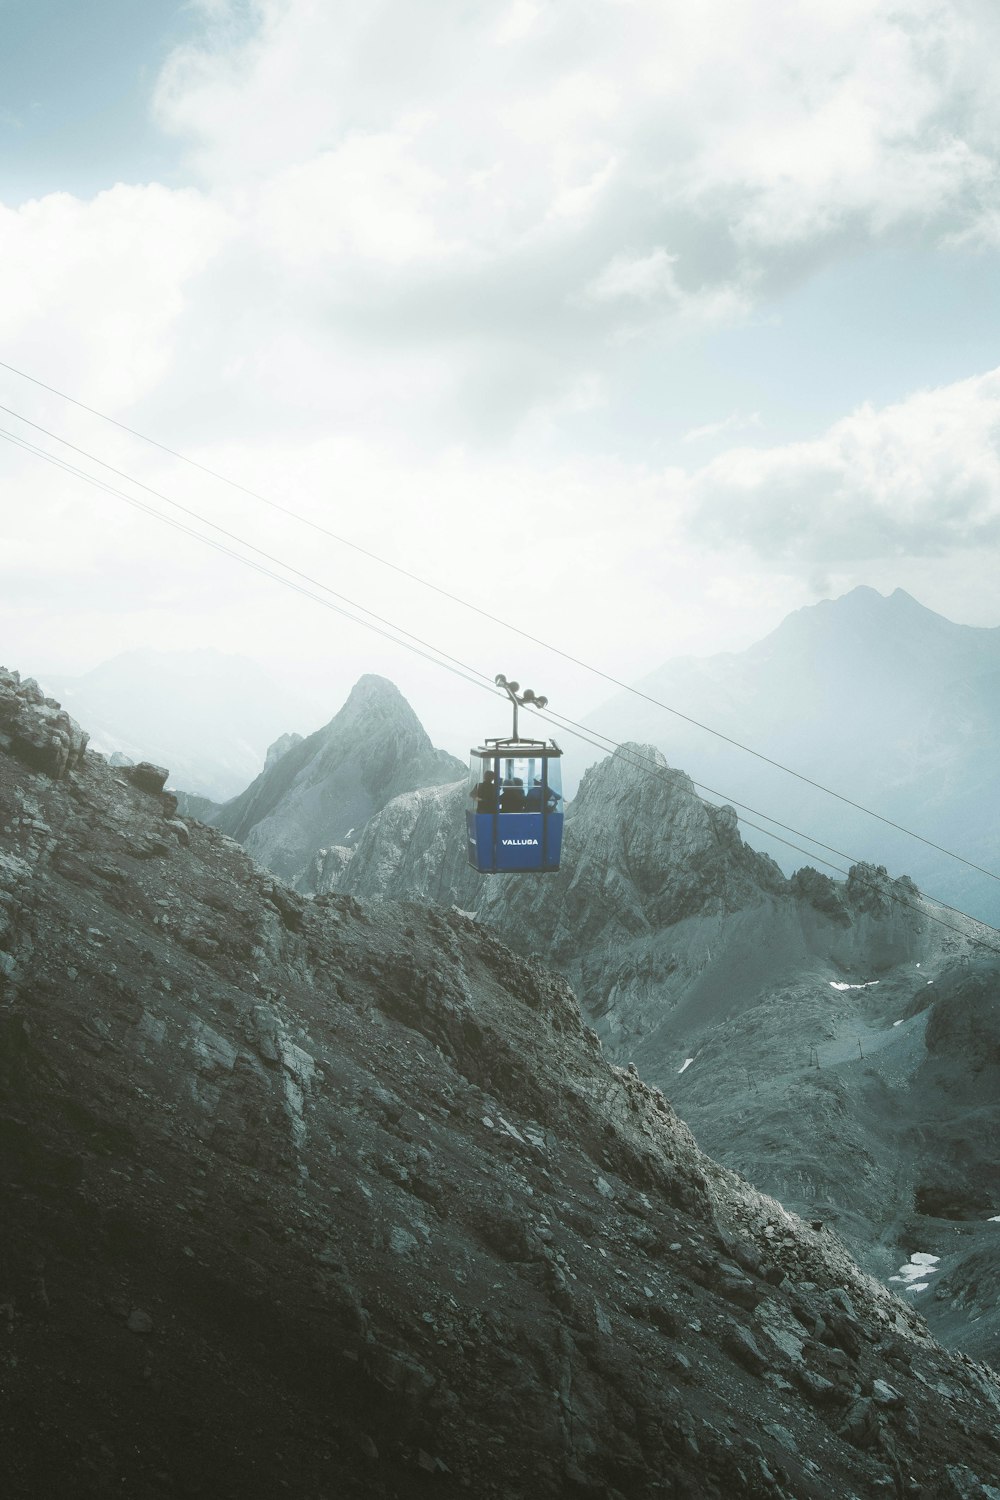 a ski lift going up a mountain on a cloudy day